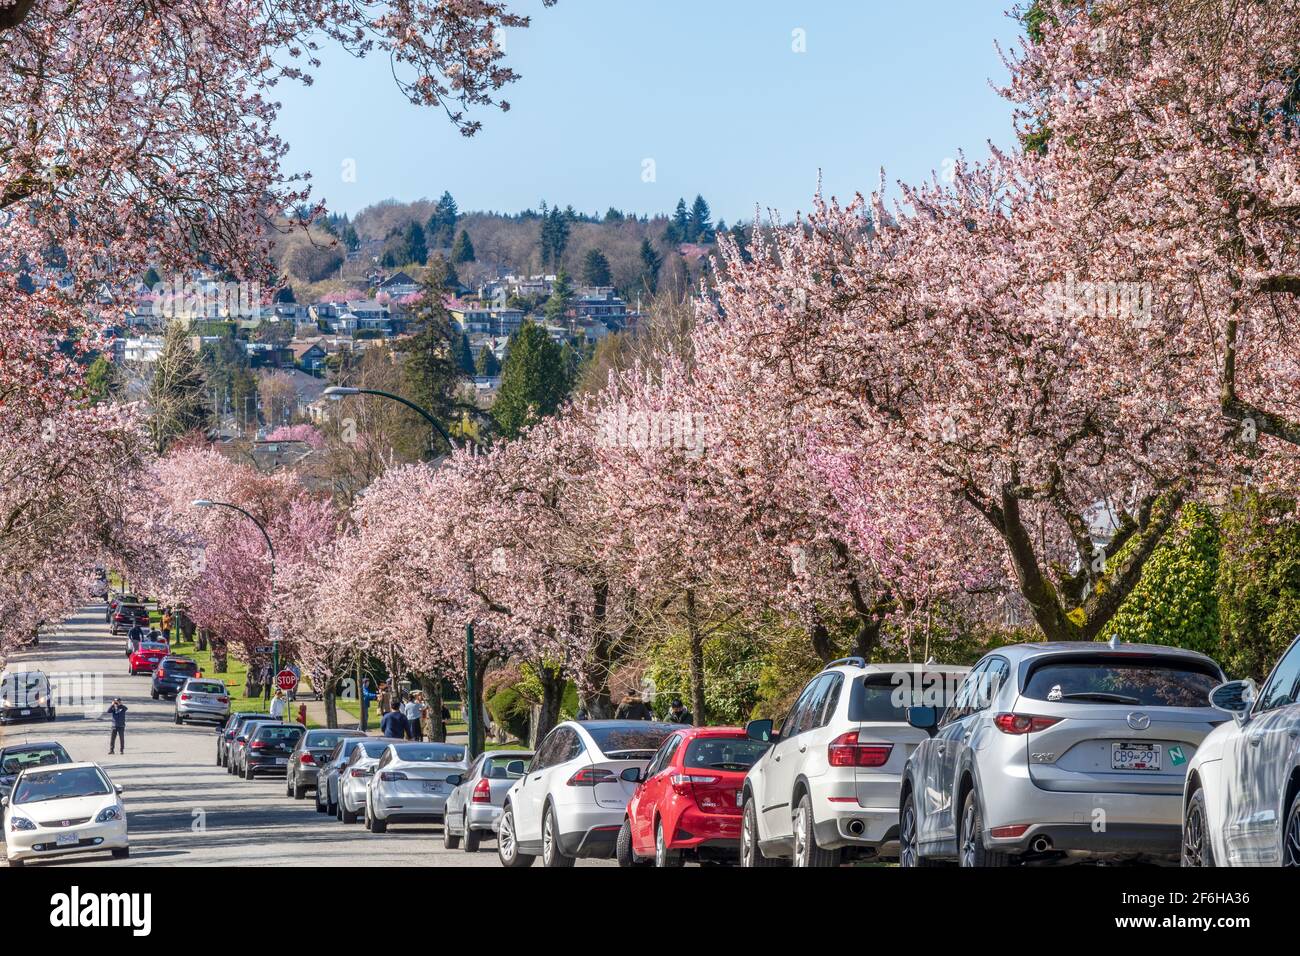 Cherry blossom in beautiful full bloom in West 22nd Avenue, Arbutus Ridge residential neighbourhood. Vancouver, BC, Canada. Stock Photo